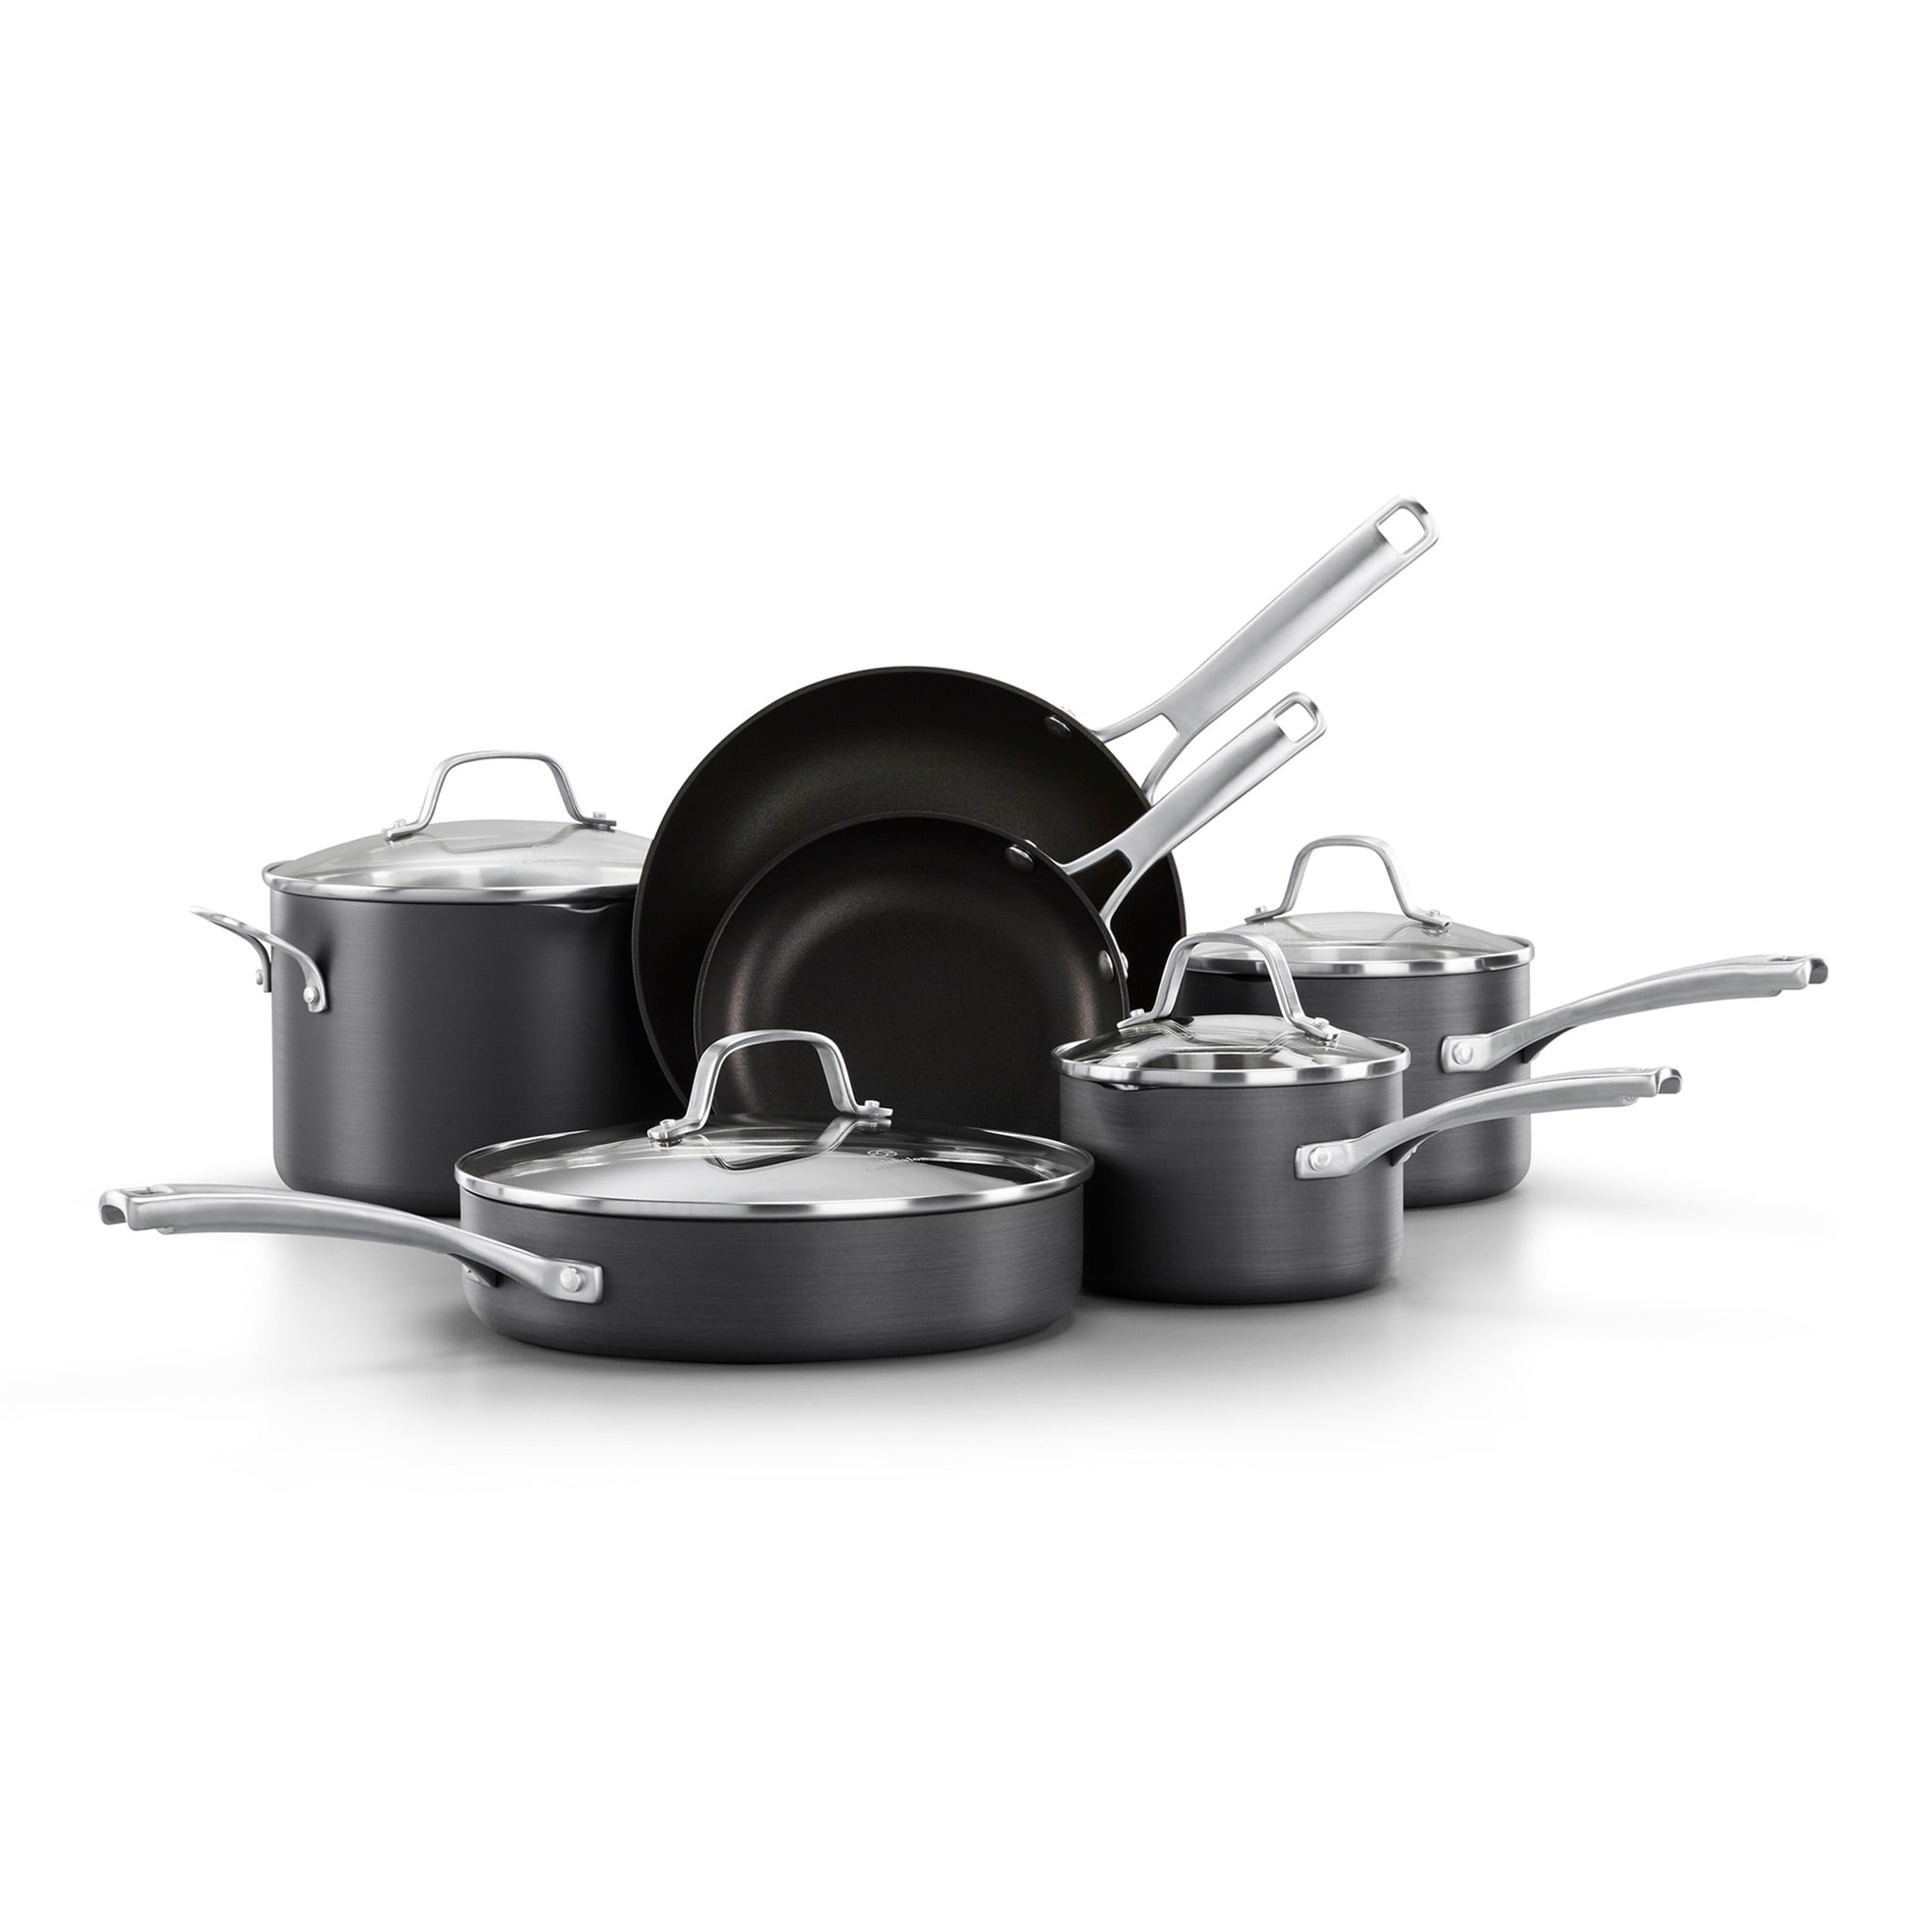 BALLARINI Parma by HENCKELS 10-pc Nonstick Pot and Pan Set, Made in Italy,  Set includes fry pans, saucepans, sauté pan and Dutch oven with lid,Gray -  Yahoo Shopping